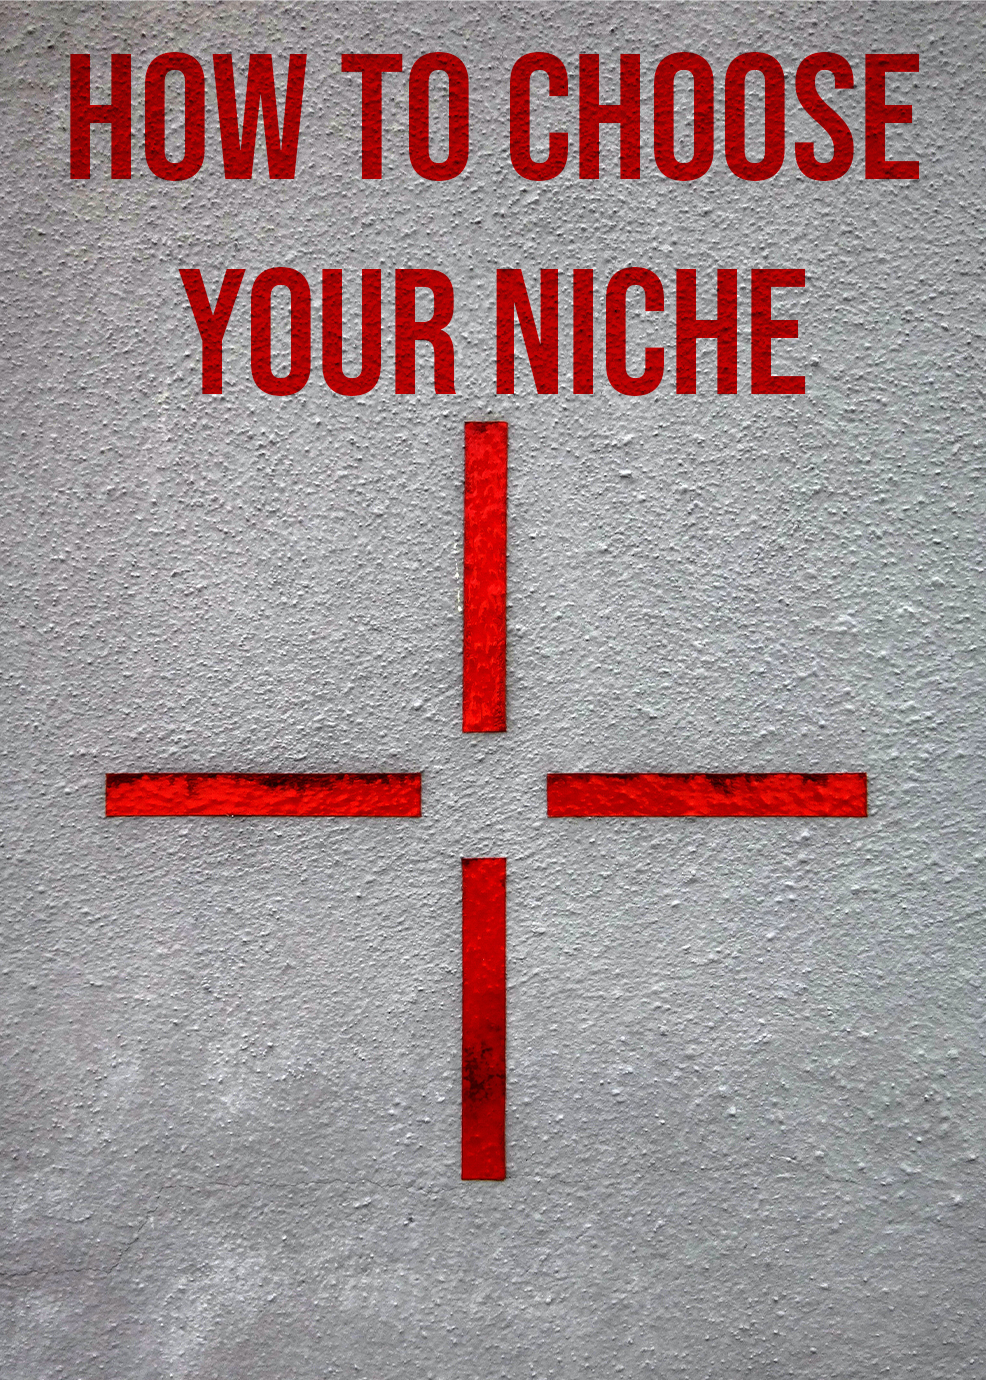 How to Choose Your Niche